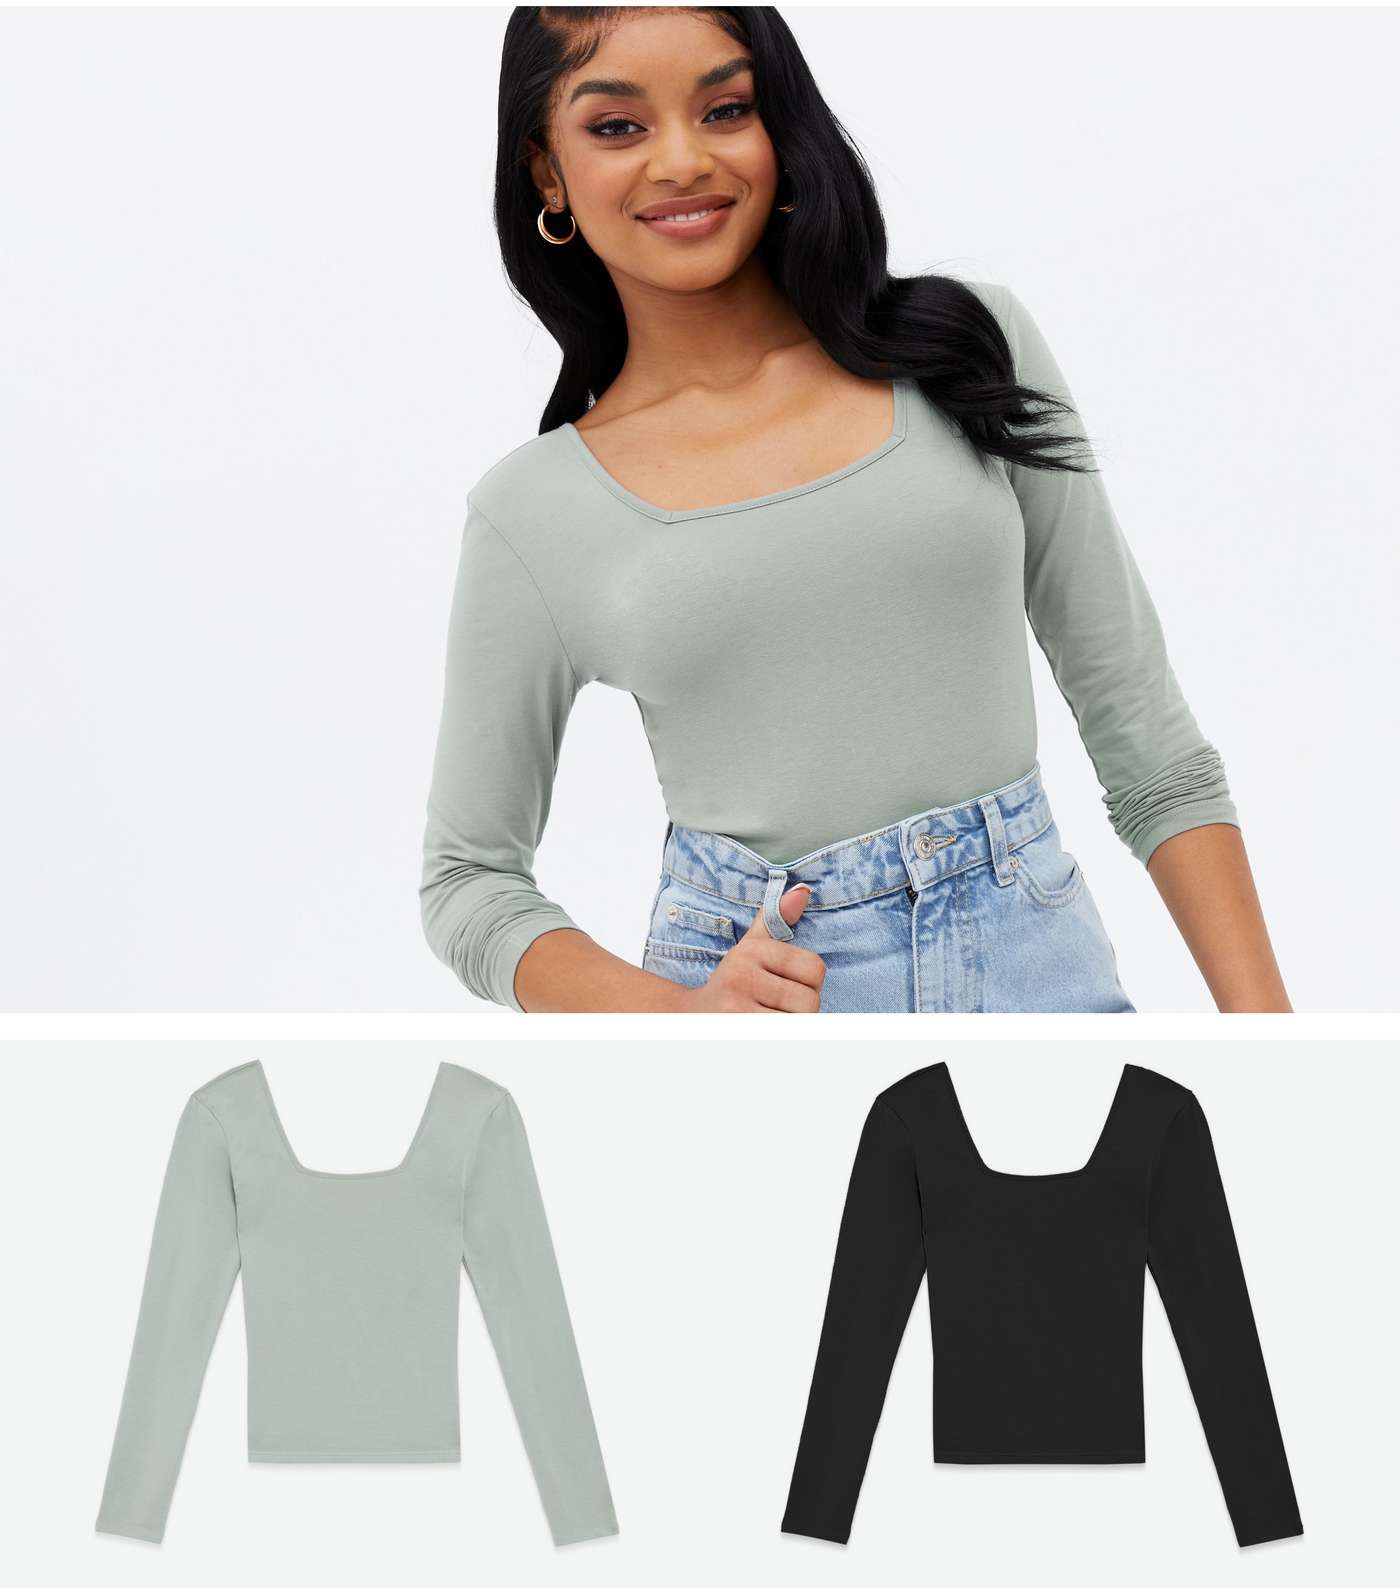 Petite 2 Pack Light Green and Black Square Neck Tops